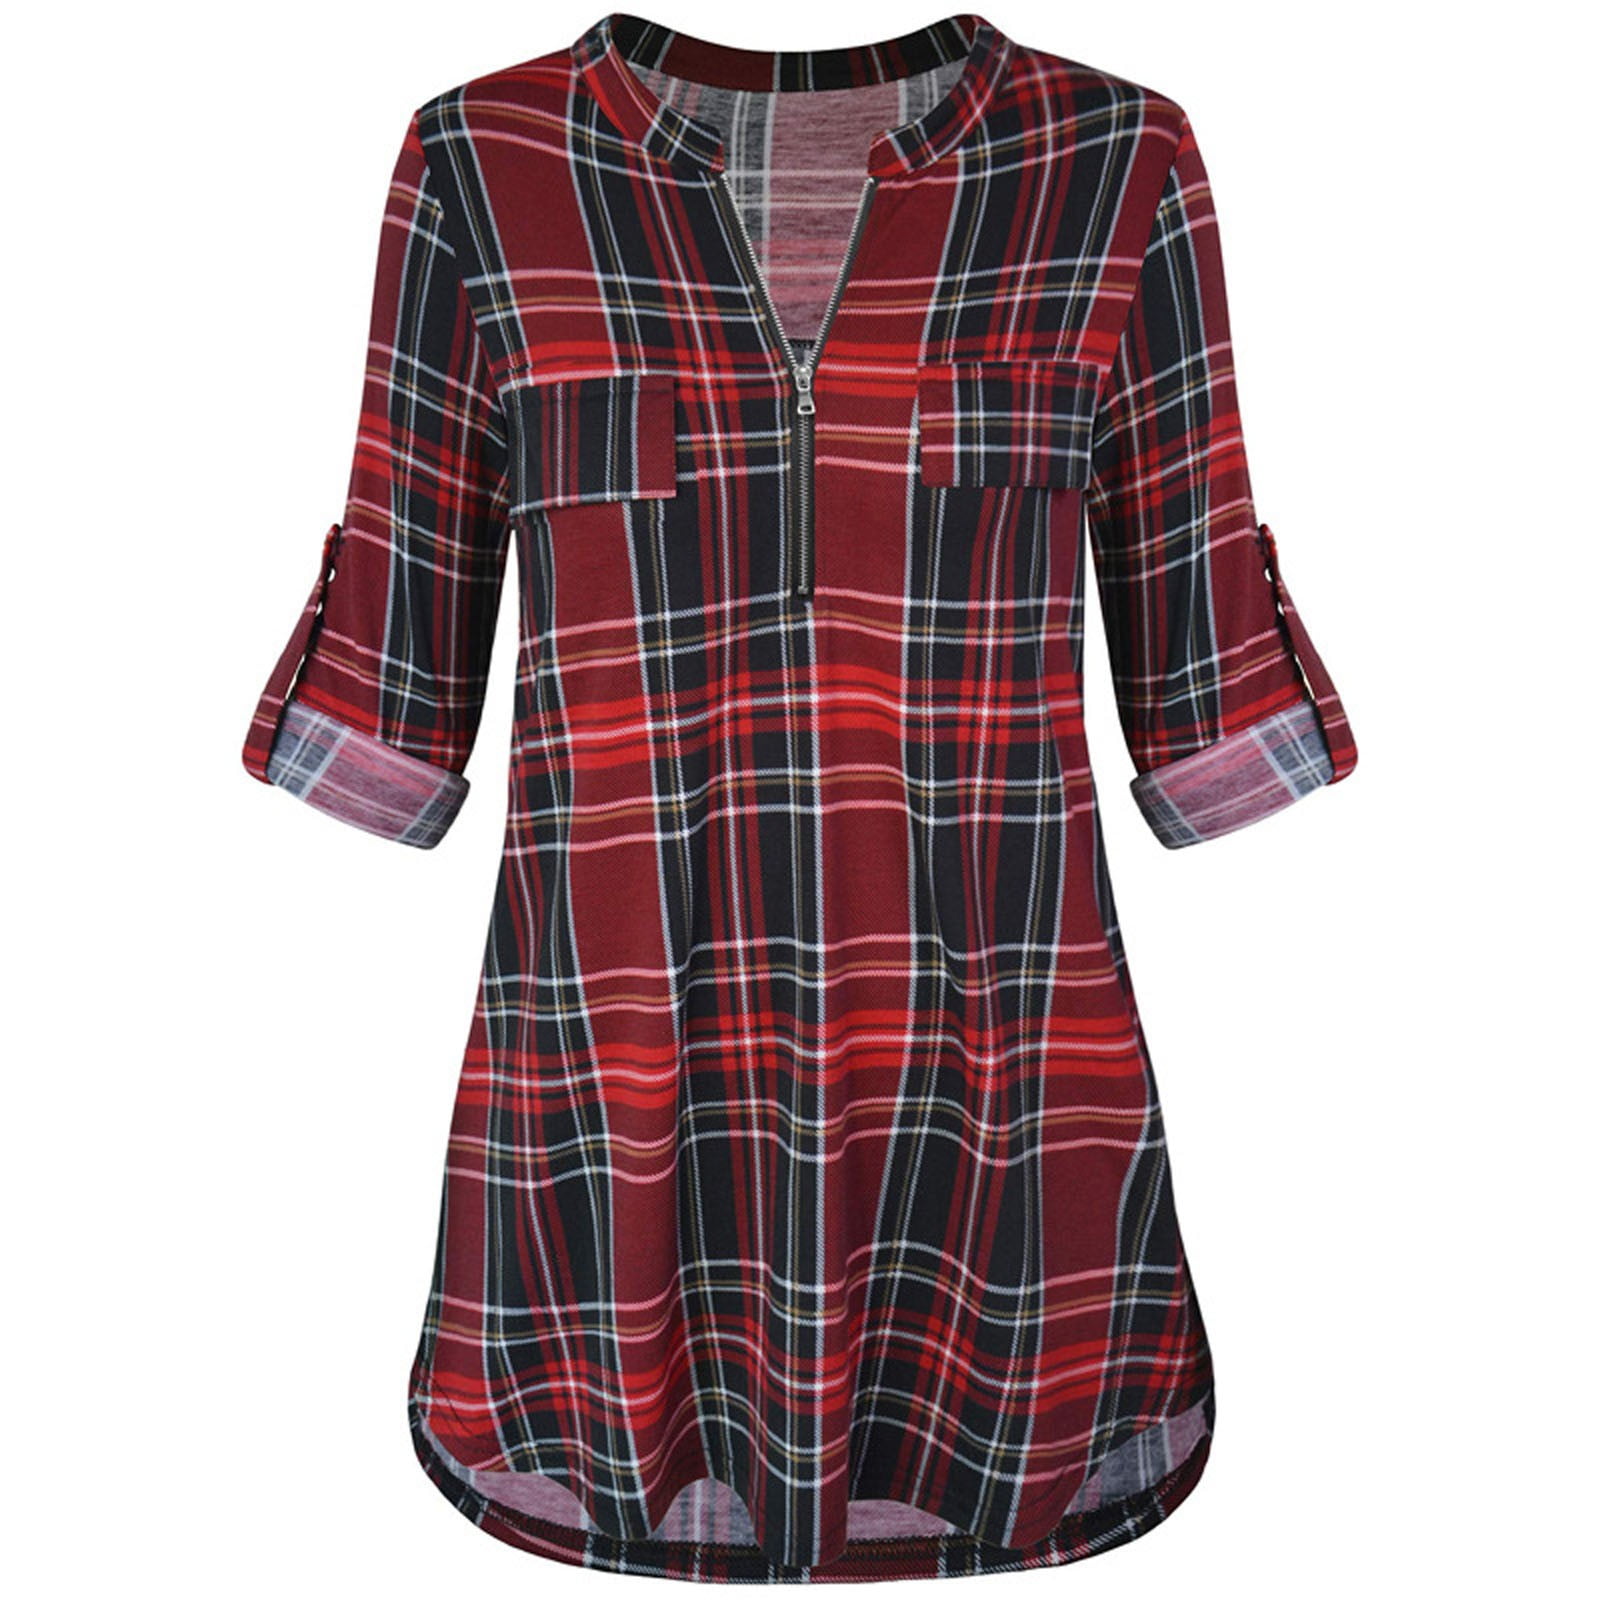 Athletic Wear Women Tops Tunic Tops for Tall Ladies Bralette Blouse Plaid  Crop Top Lace Up Top Women Relaxed Fit Tee Red Fashion Top Lady Wrap Women's  Athletic Tunic Tops Mocks for